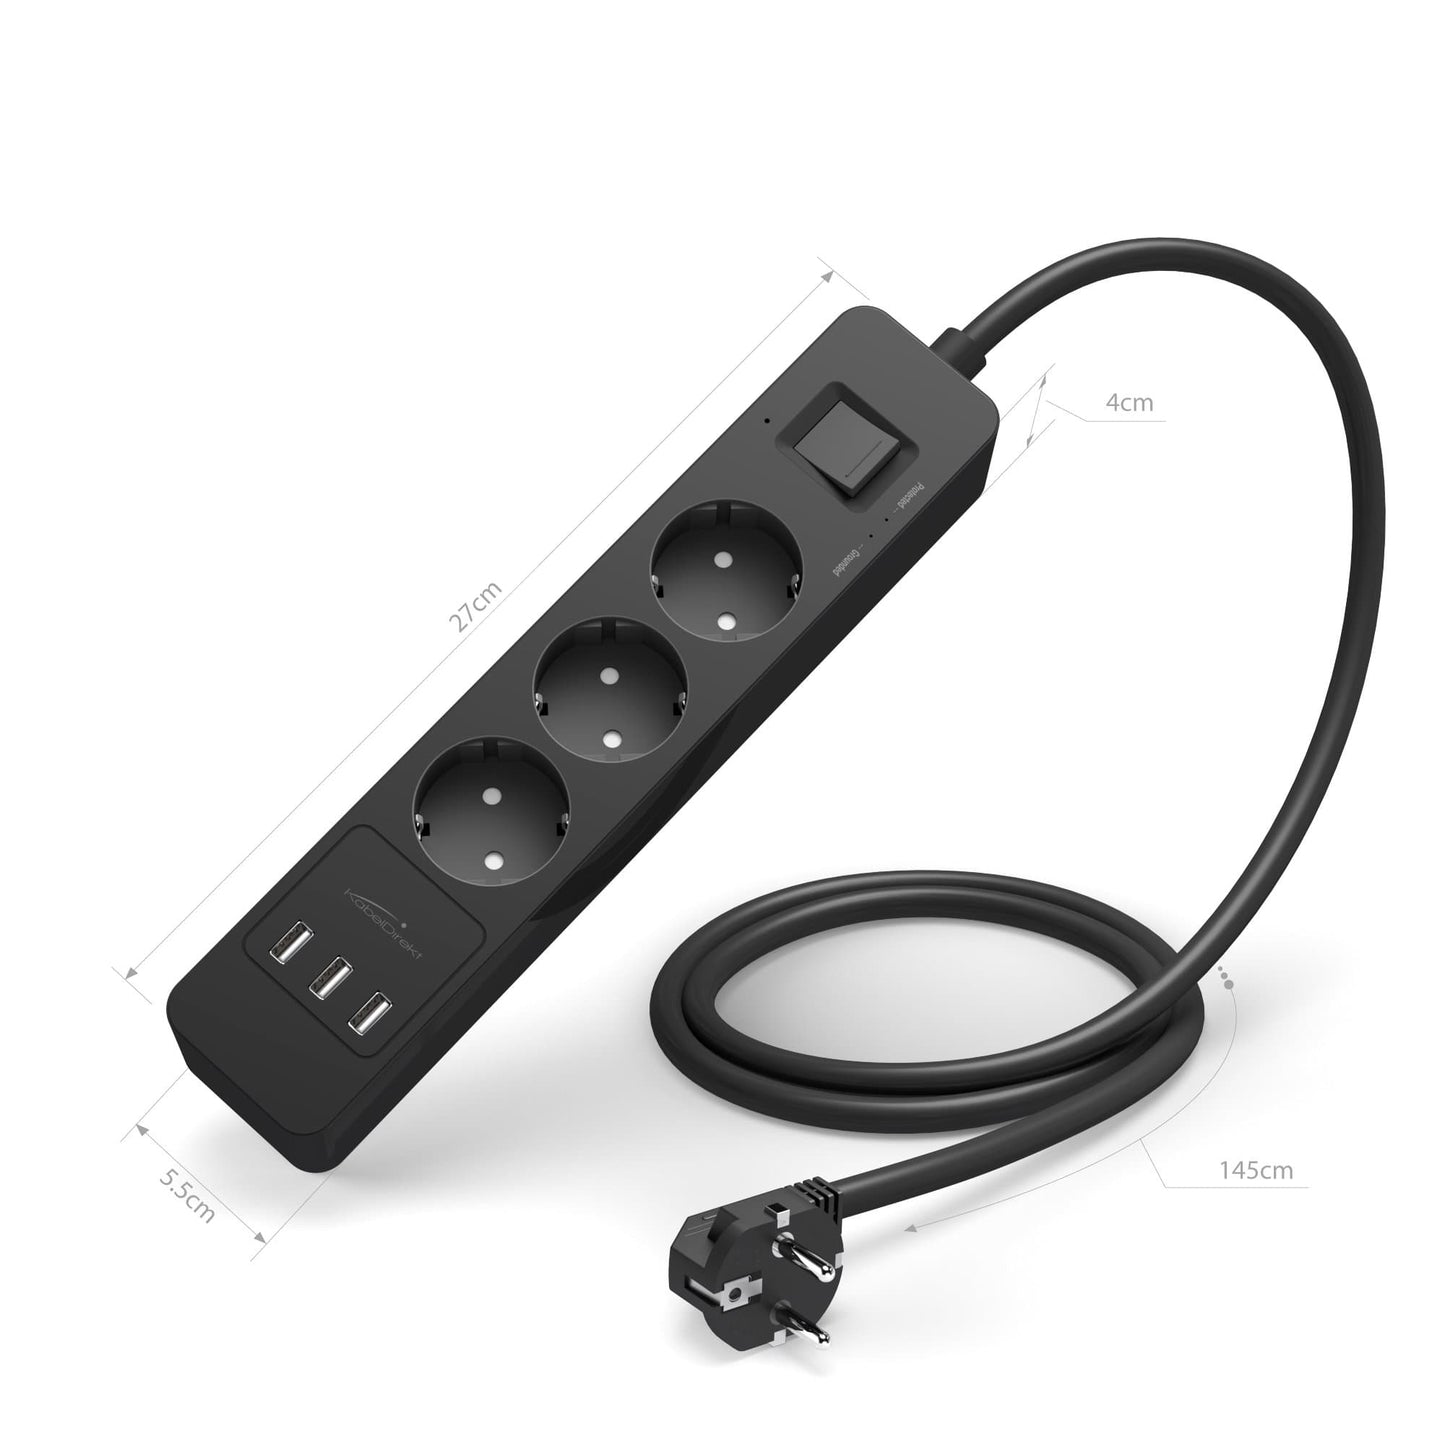 Black power strips – TÜV-approved multi-socket outlet with 3 USB-A charging ports